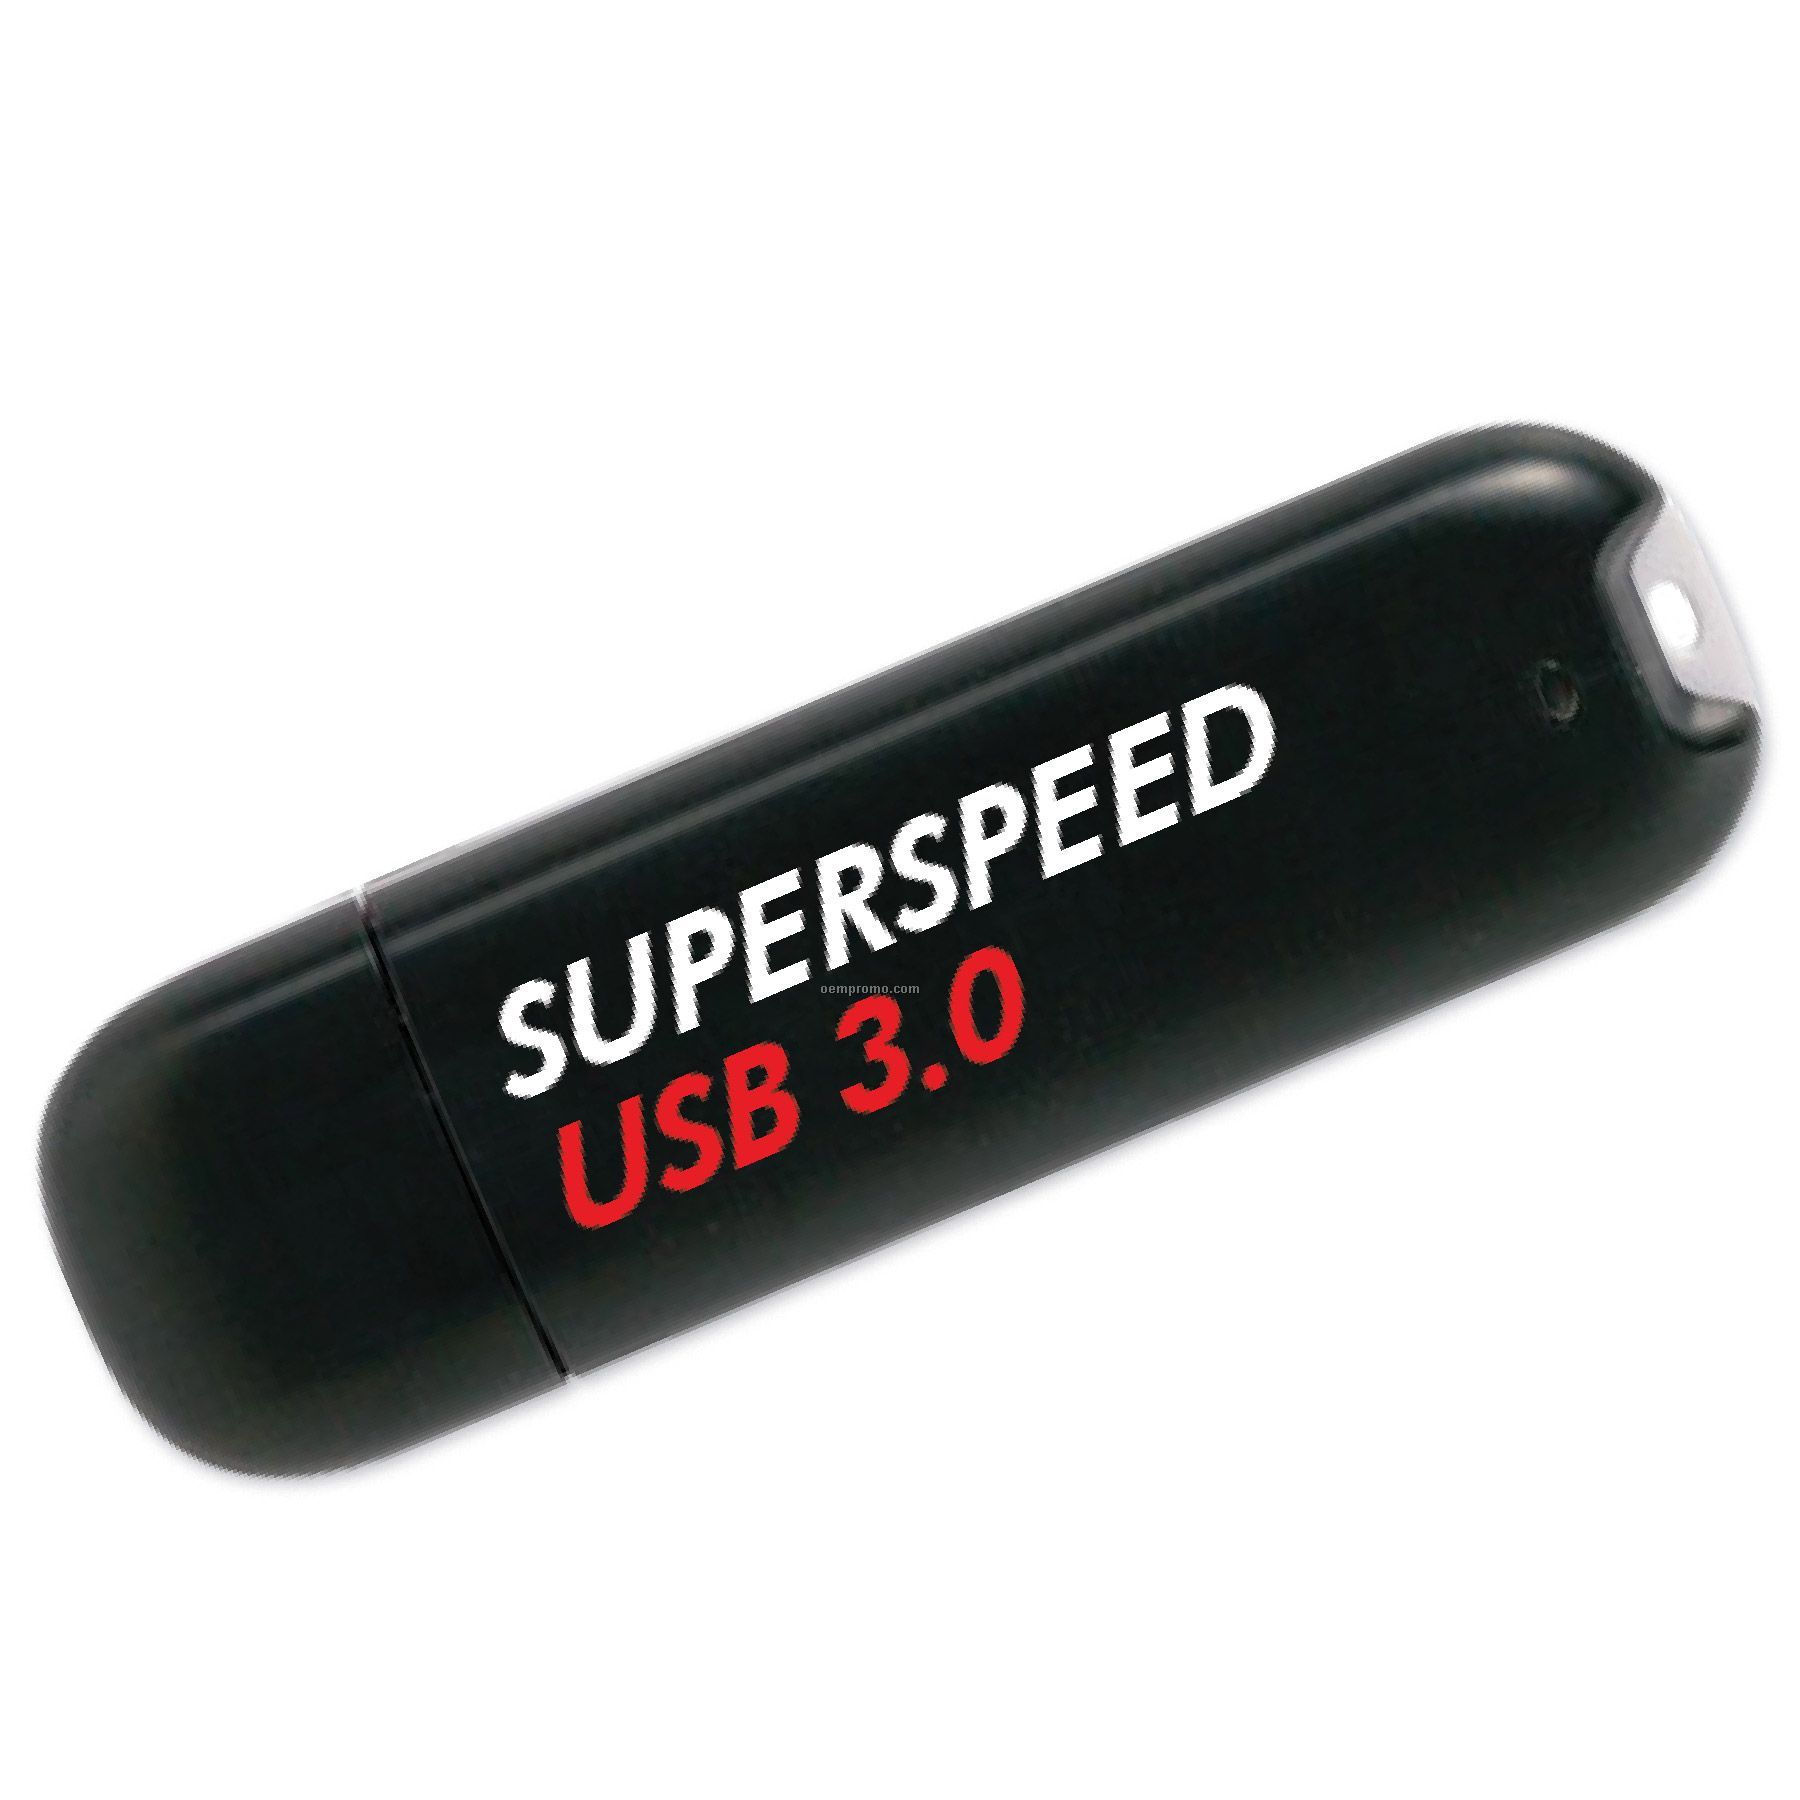 USB 3.o Superspeed Drive Ss